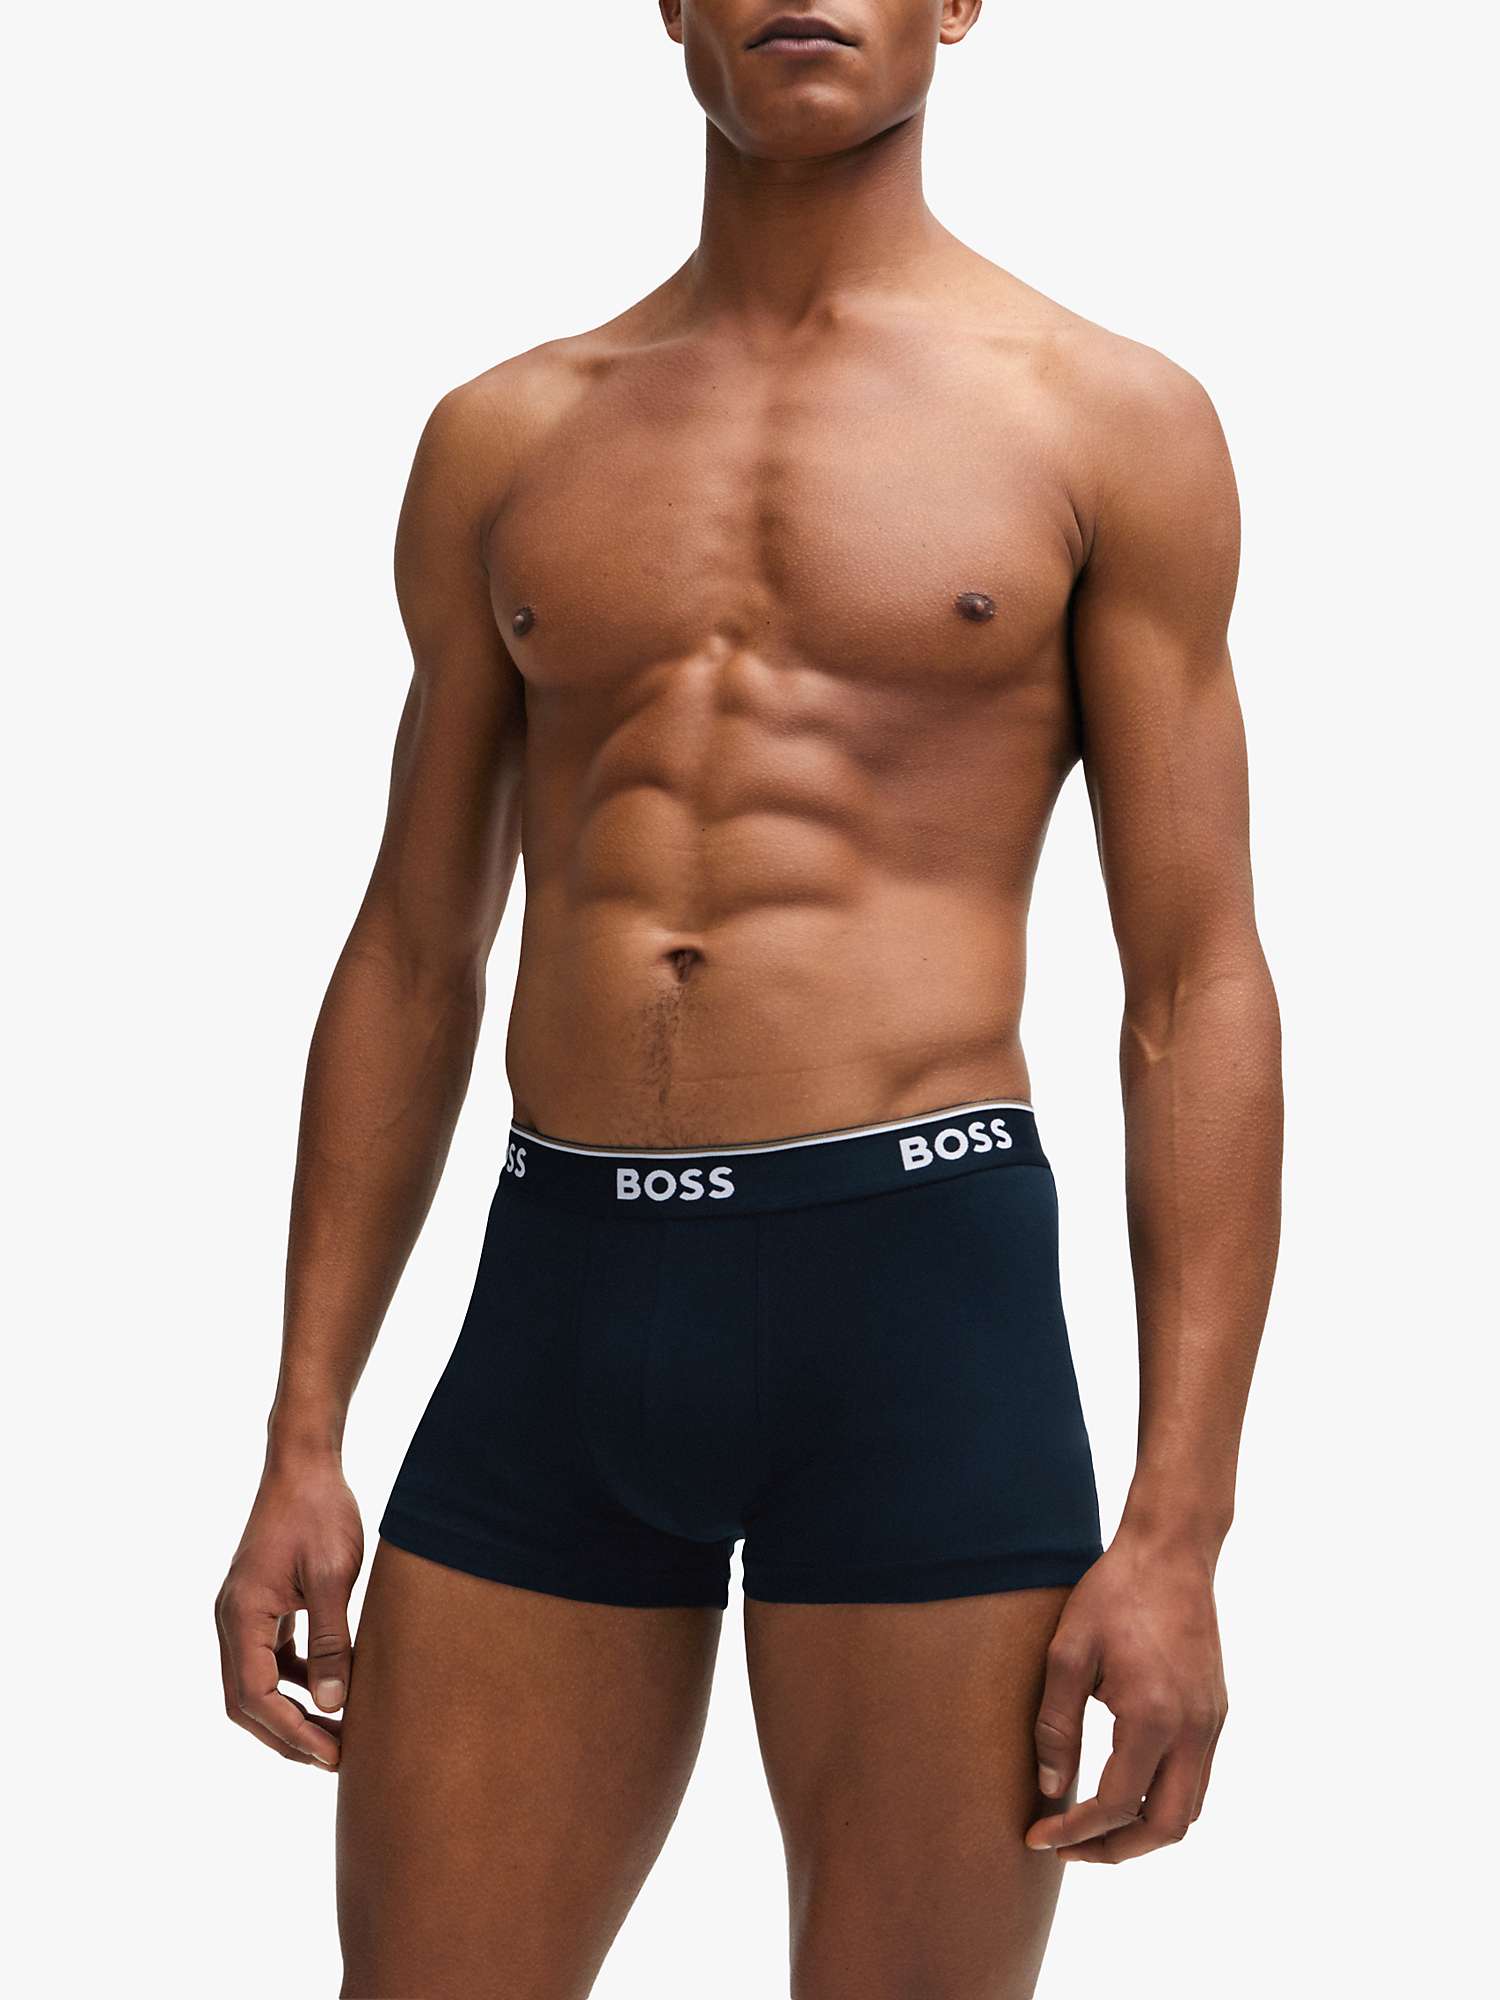 Buy BOSS Essential Everyday Trunks, Pack of 3, Multi Online at johnlewis.com